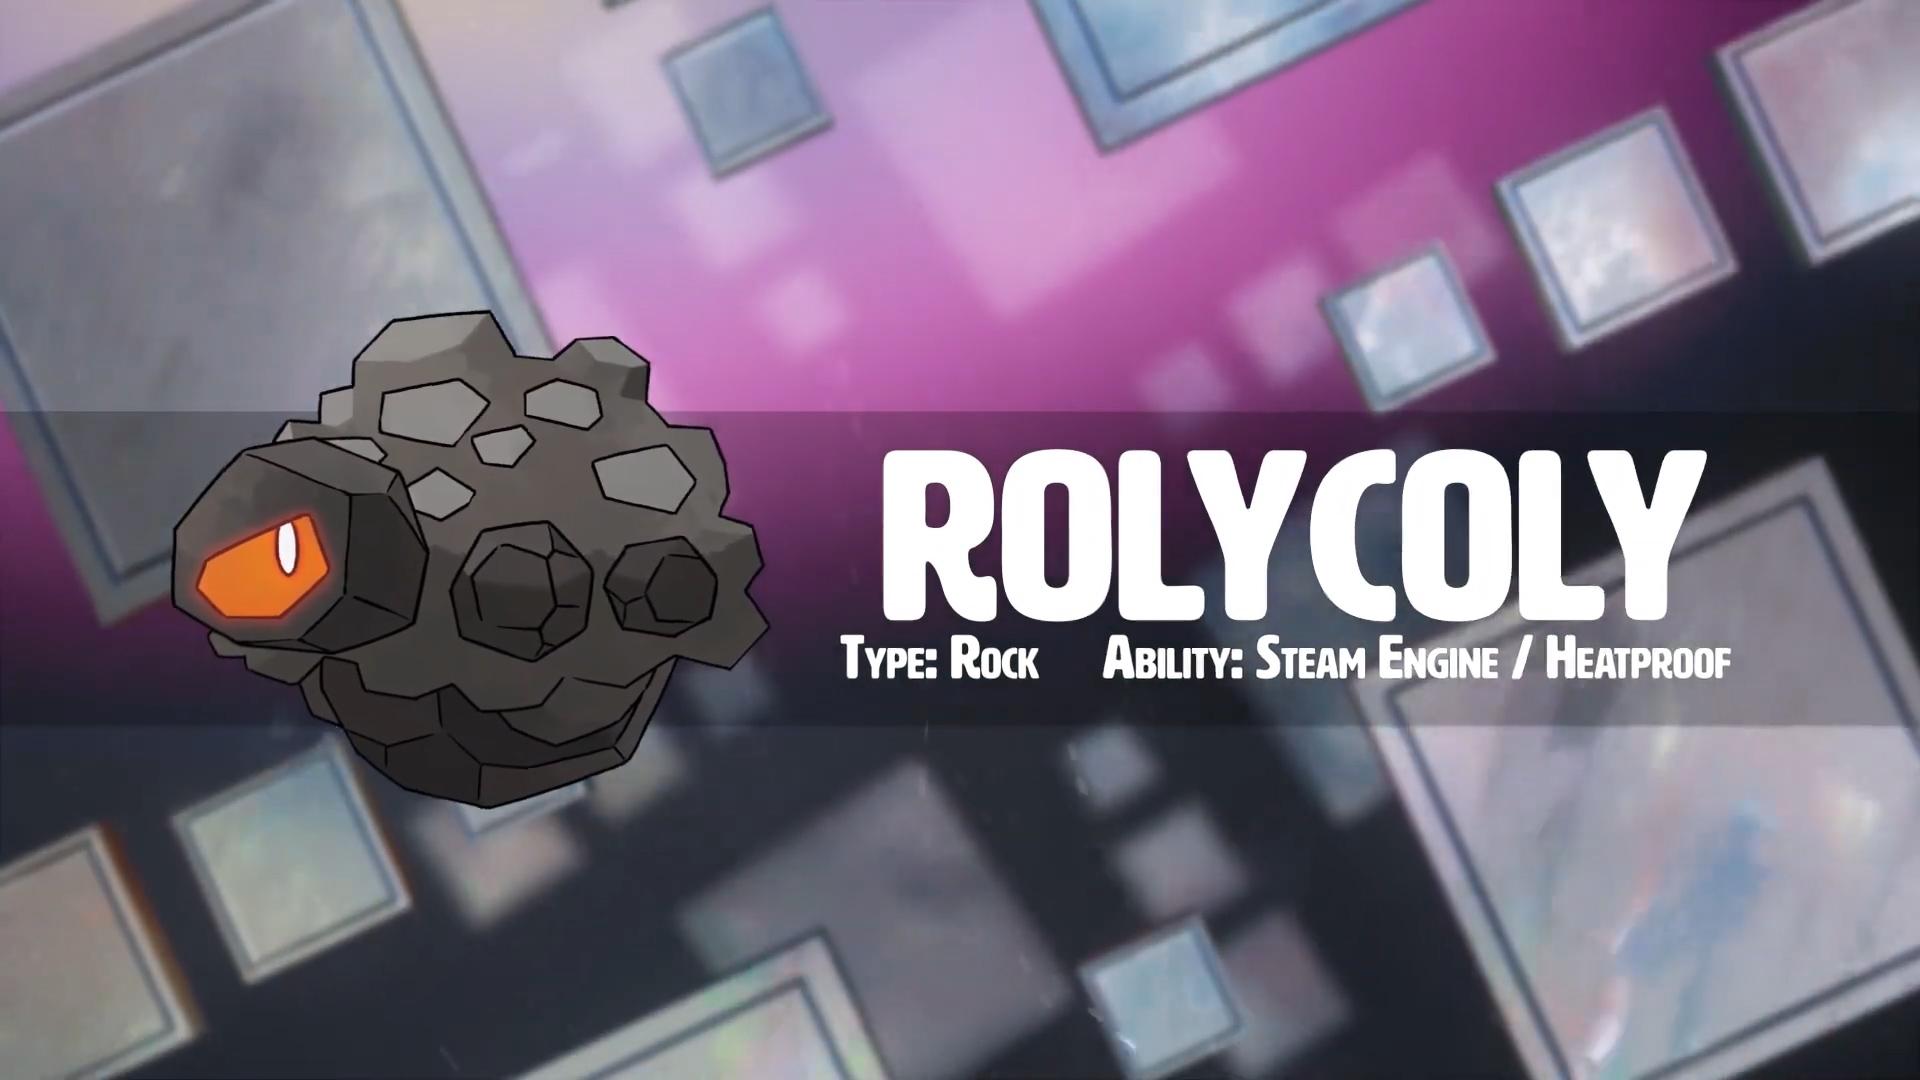 Rolycoly Hd Wallpapers